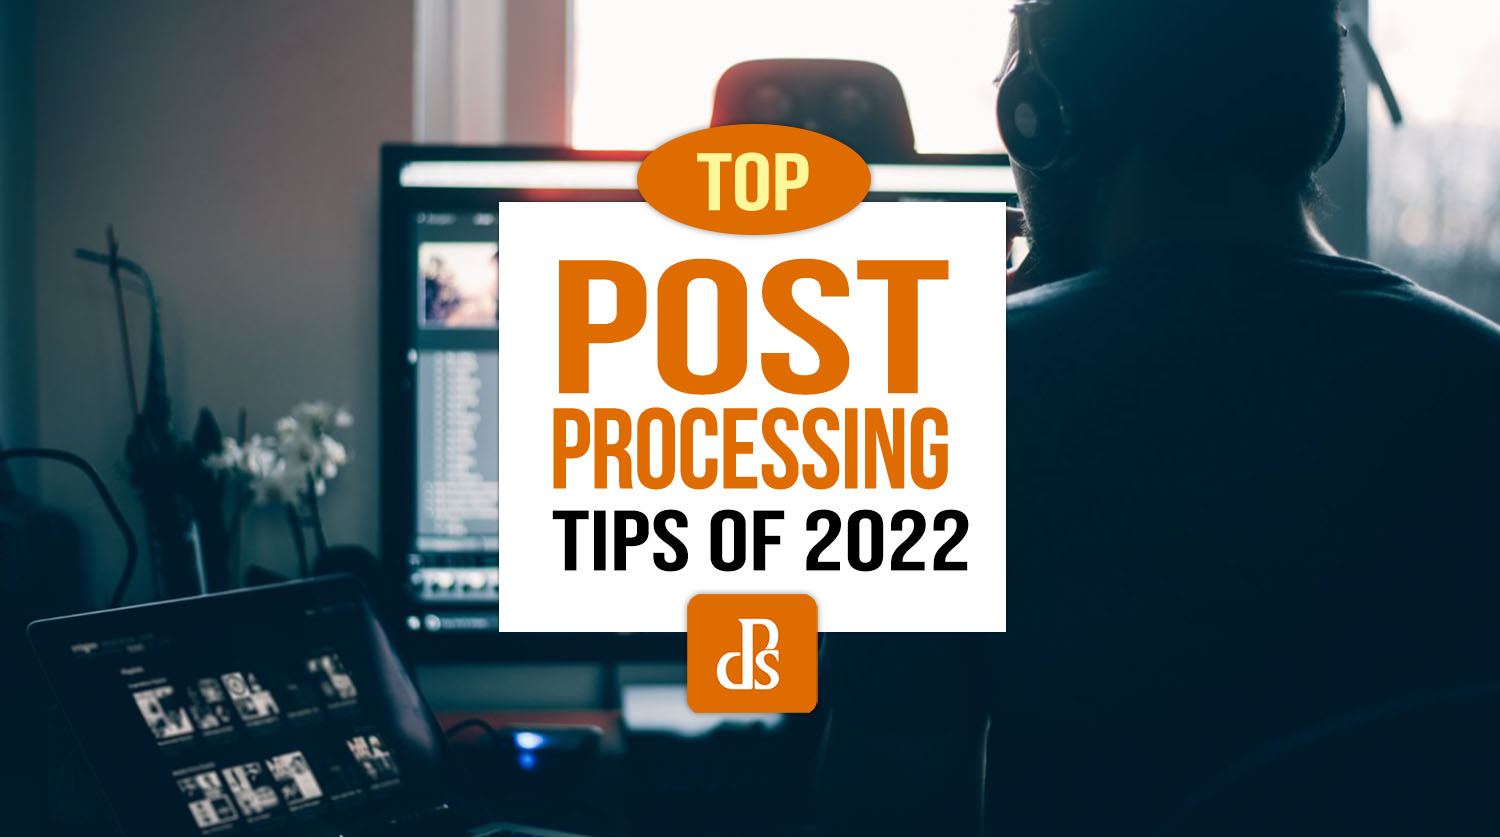 Top Post-Processing Tips of 2022